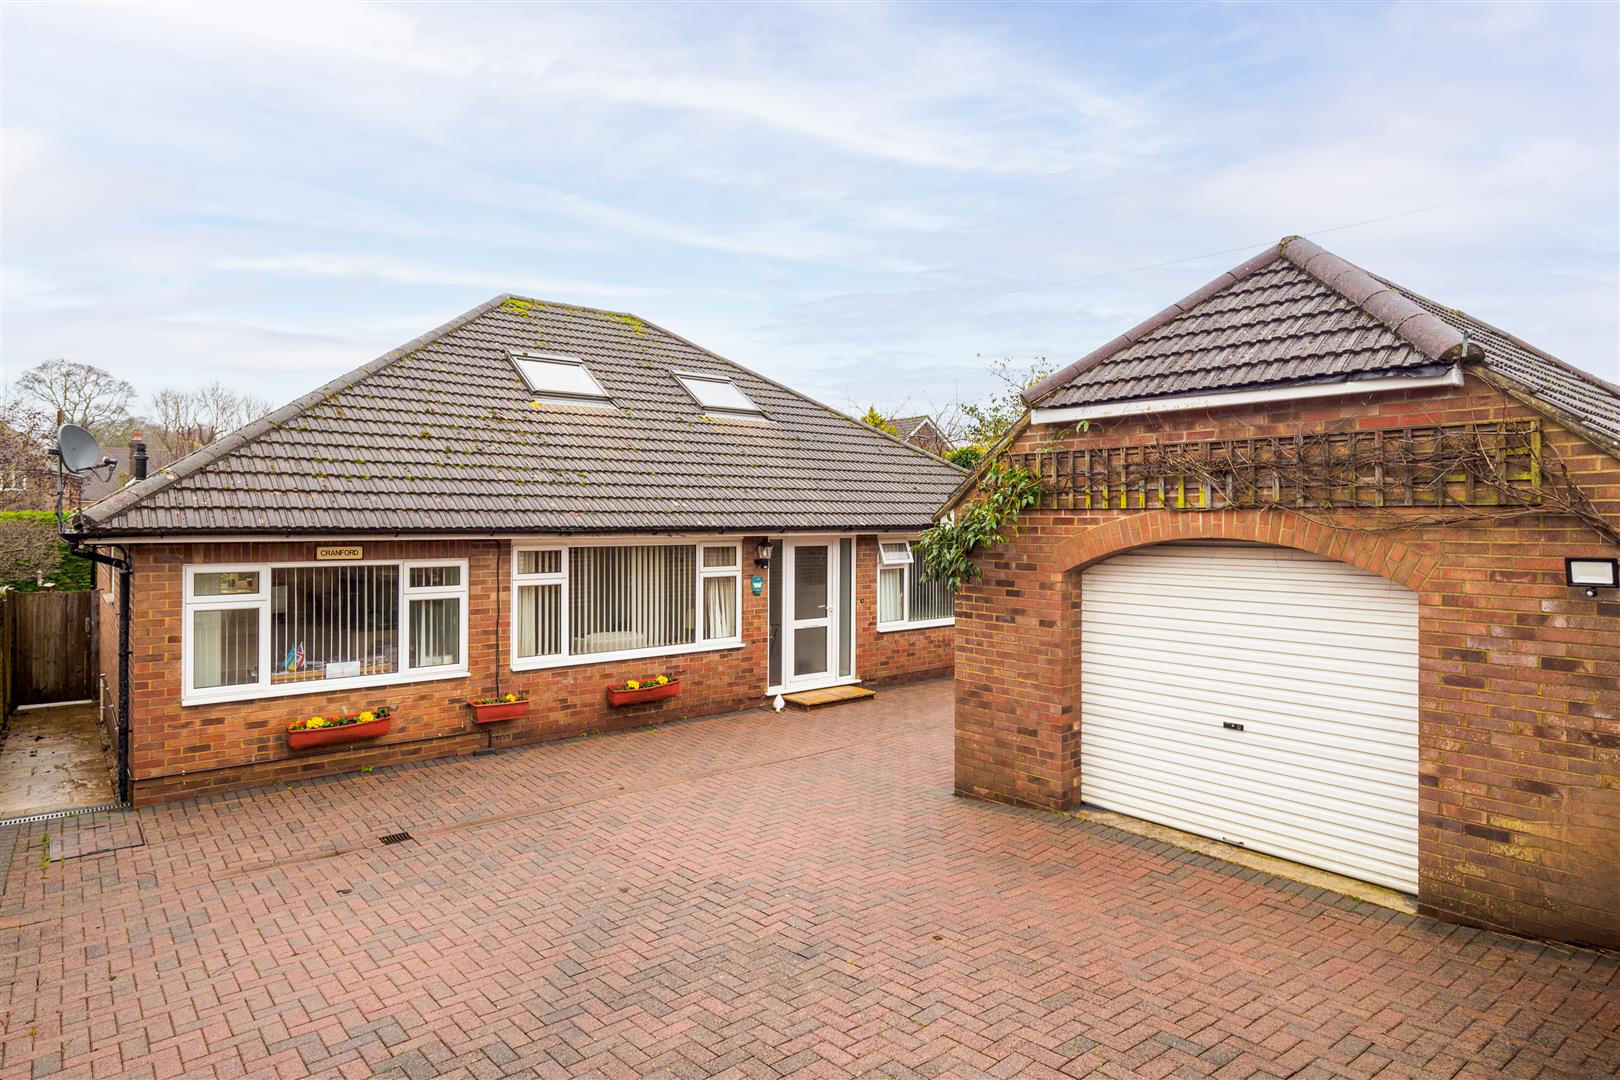 4 bed detached bungalow for sale in Acres Rise, Ticehurst - Property Image 1